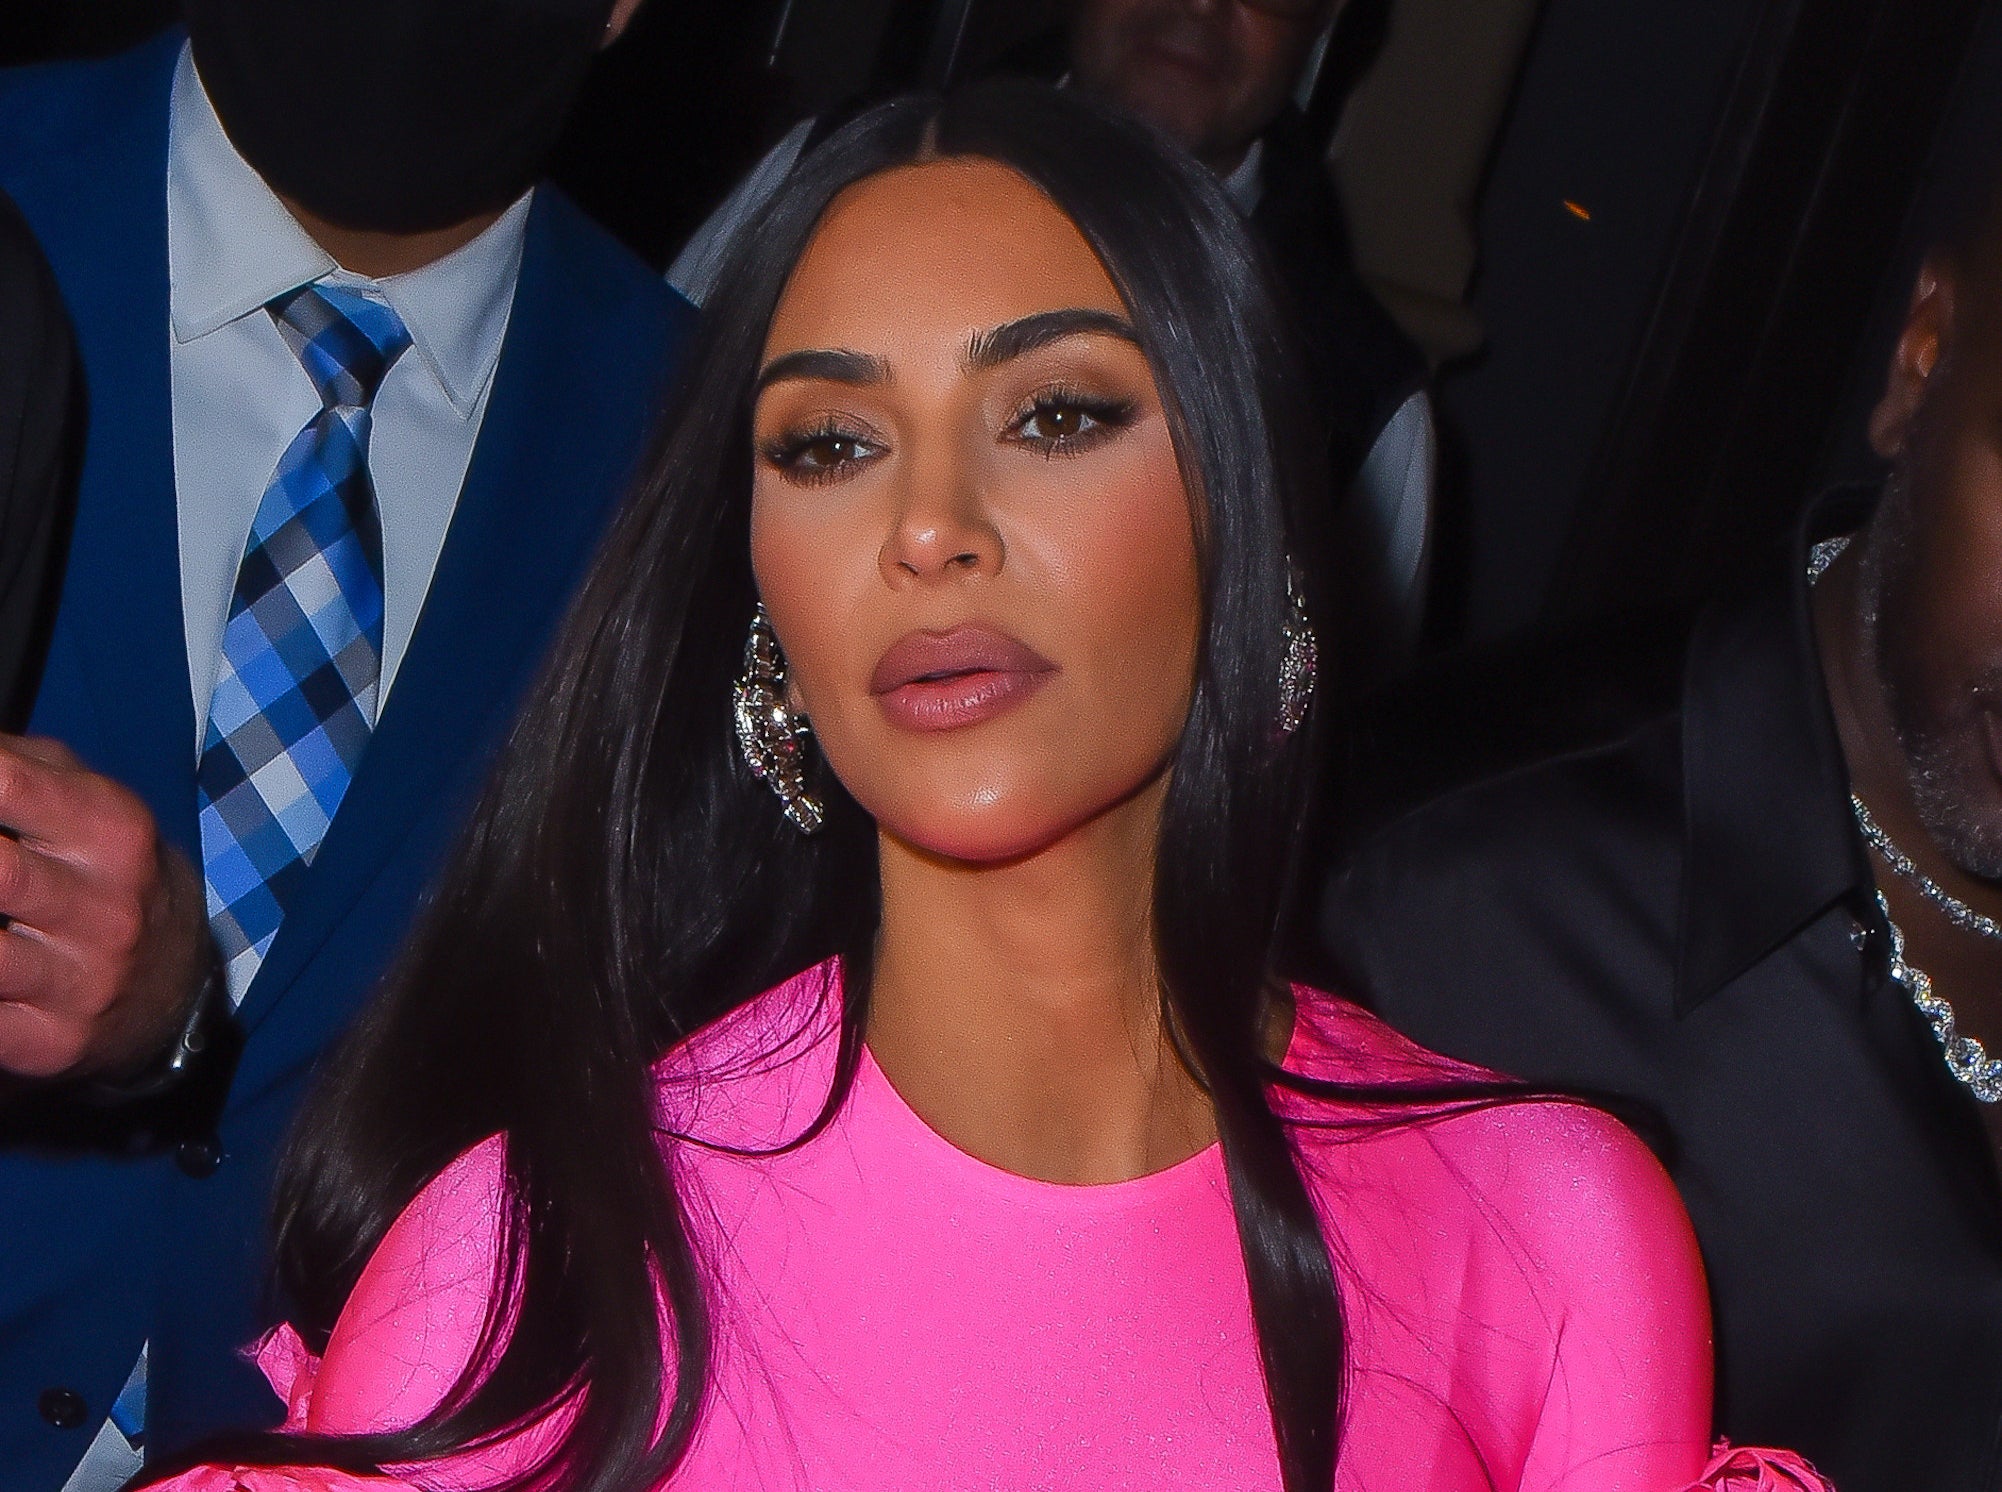 Kim Kardashian seen at the SNL after party on October 10, 2021 in New York City.